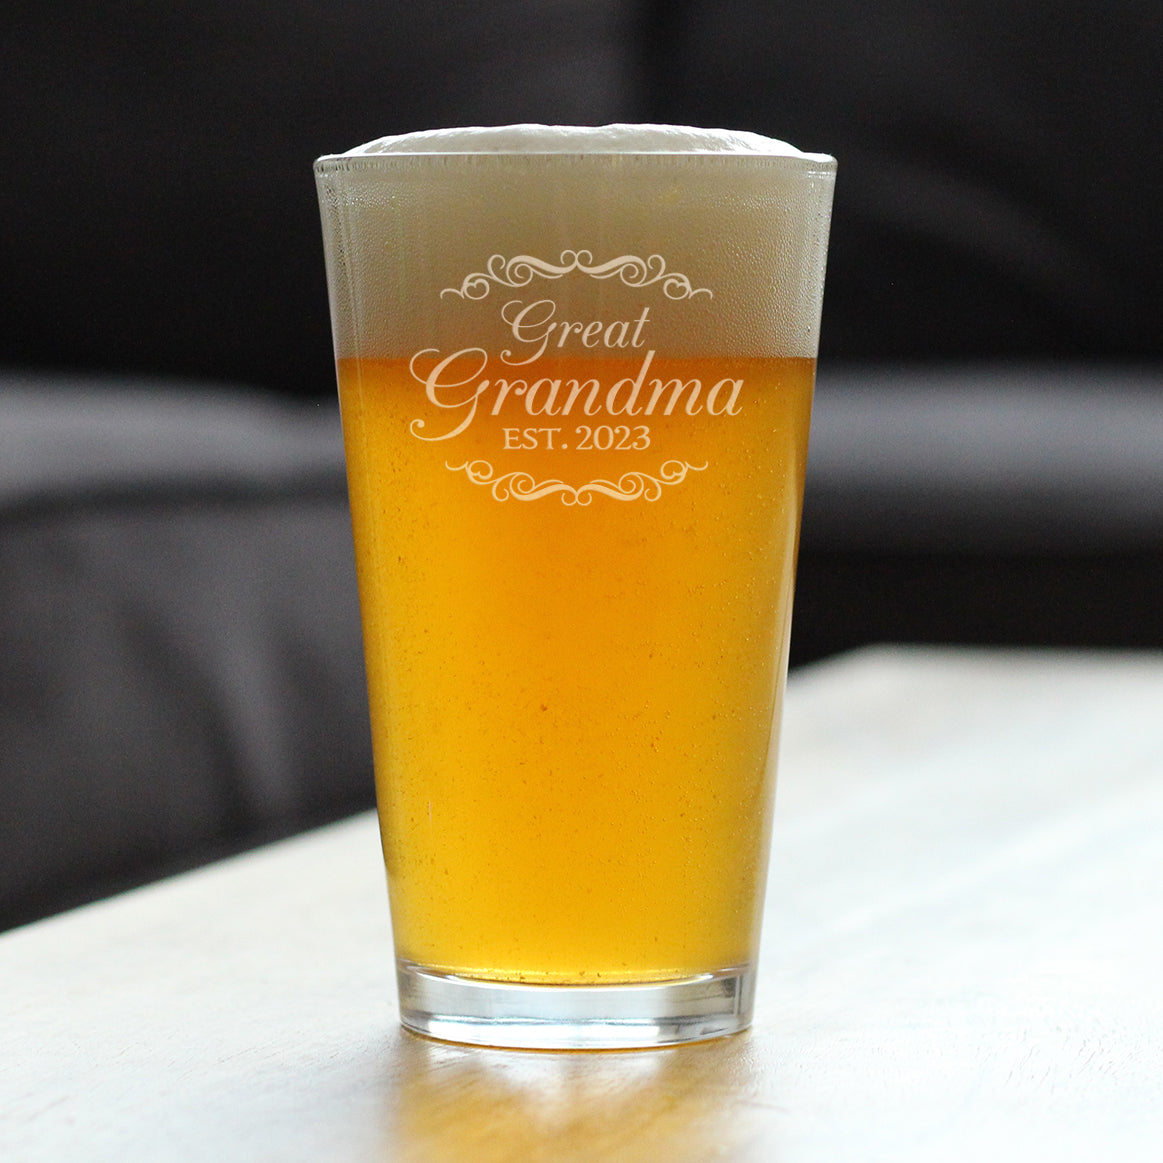 Great Grandma Est 2023 - New Great Grandmother Pint Glass Gift for First Time Great Grandparents - Decorative 16 Oz Glasses